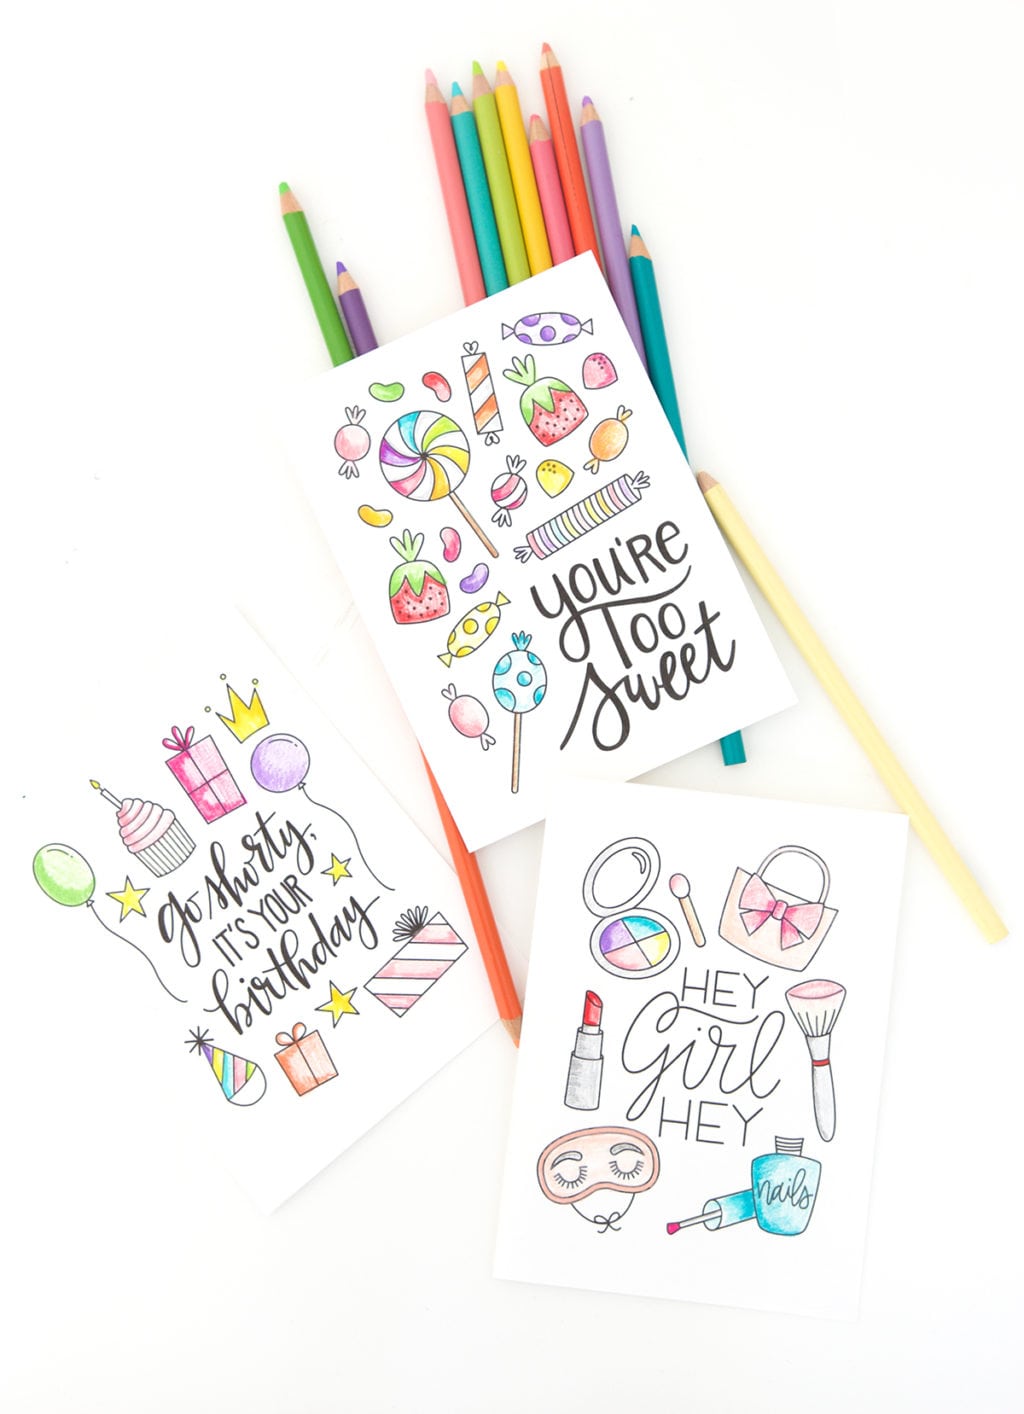 The coloring craze is here to stay. Enjoy coloring in a new way with this printable coloring greeting cards for every occasion